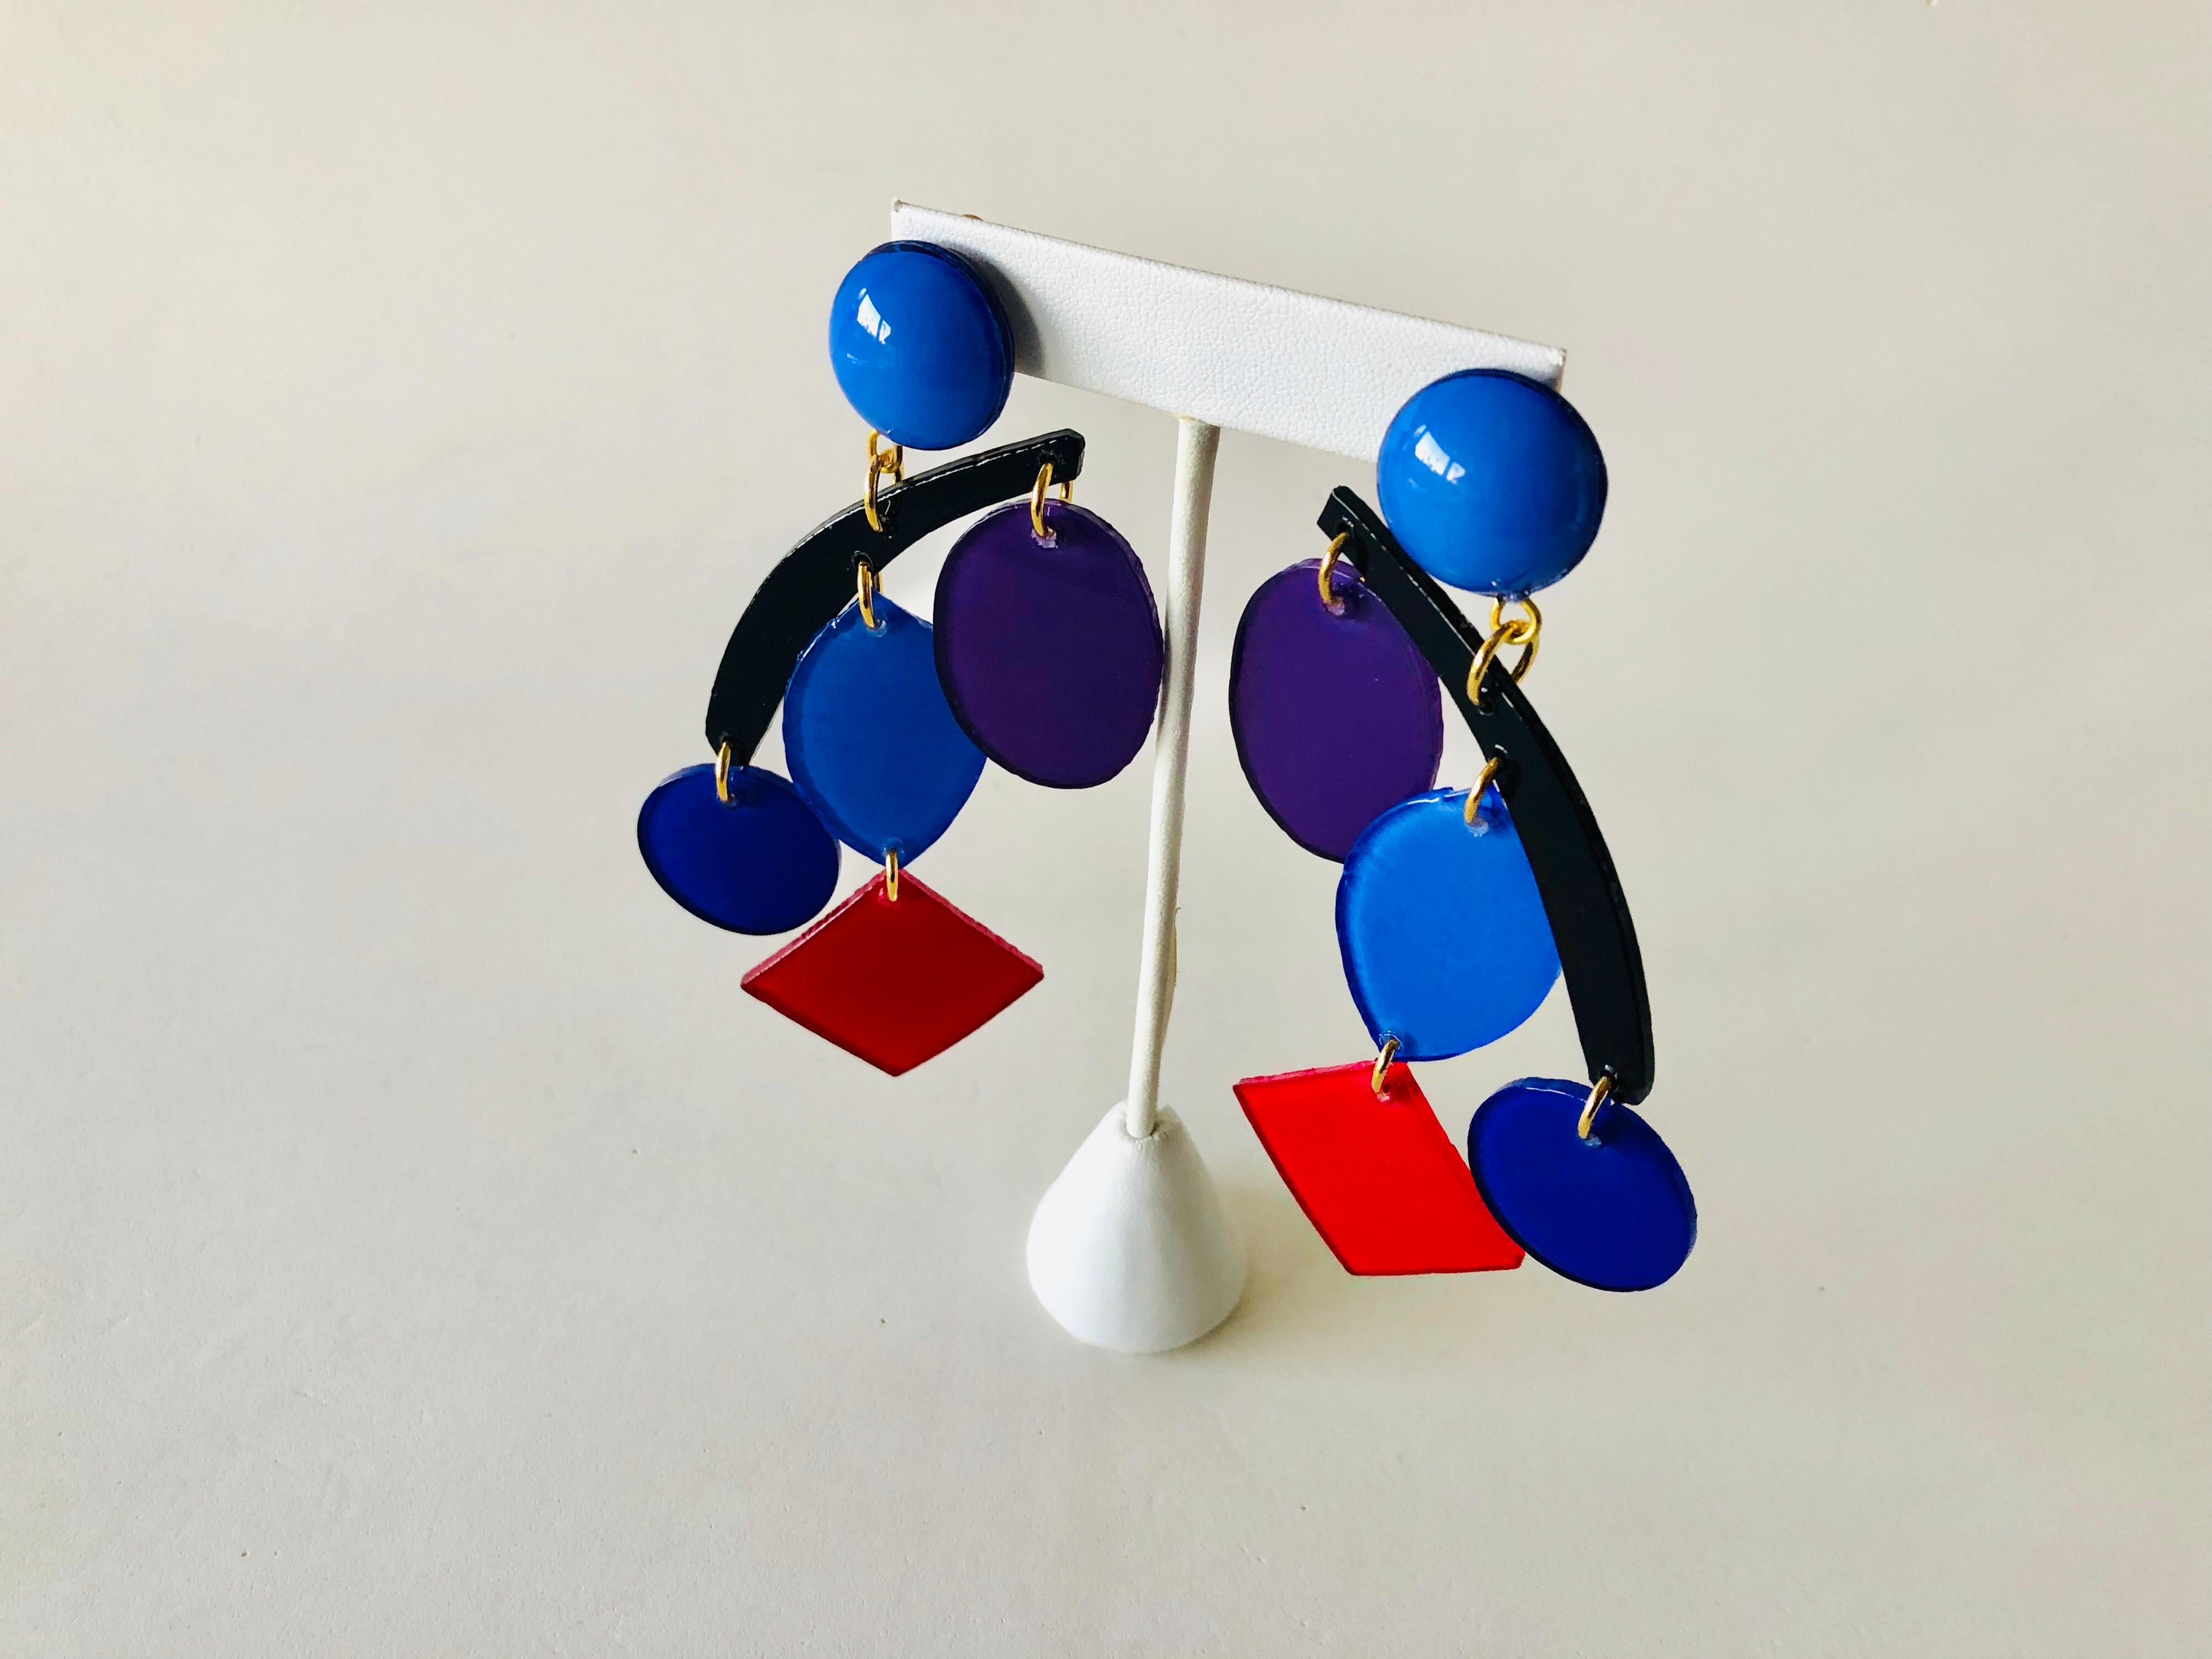 Colorful Modern Mobile Sculpture Statement Earrings  3